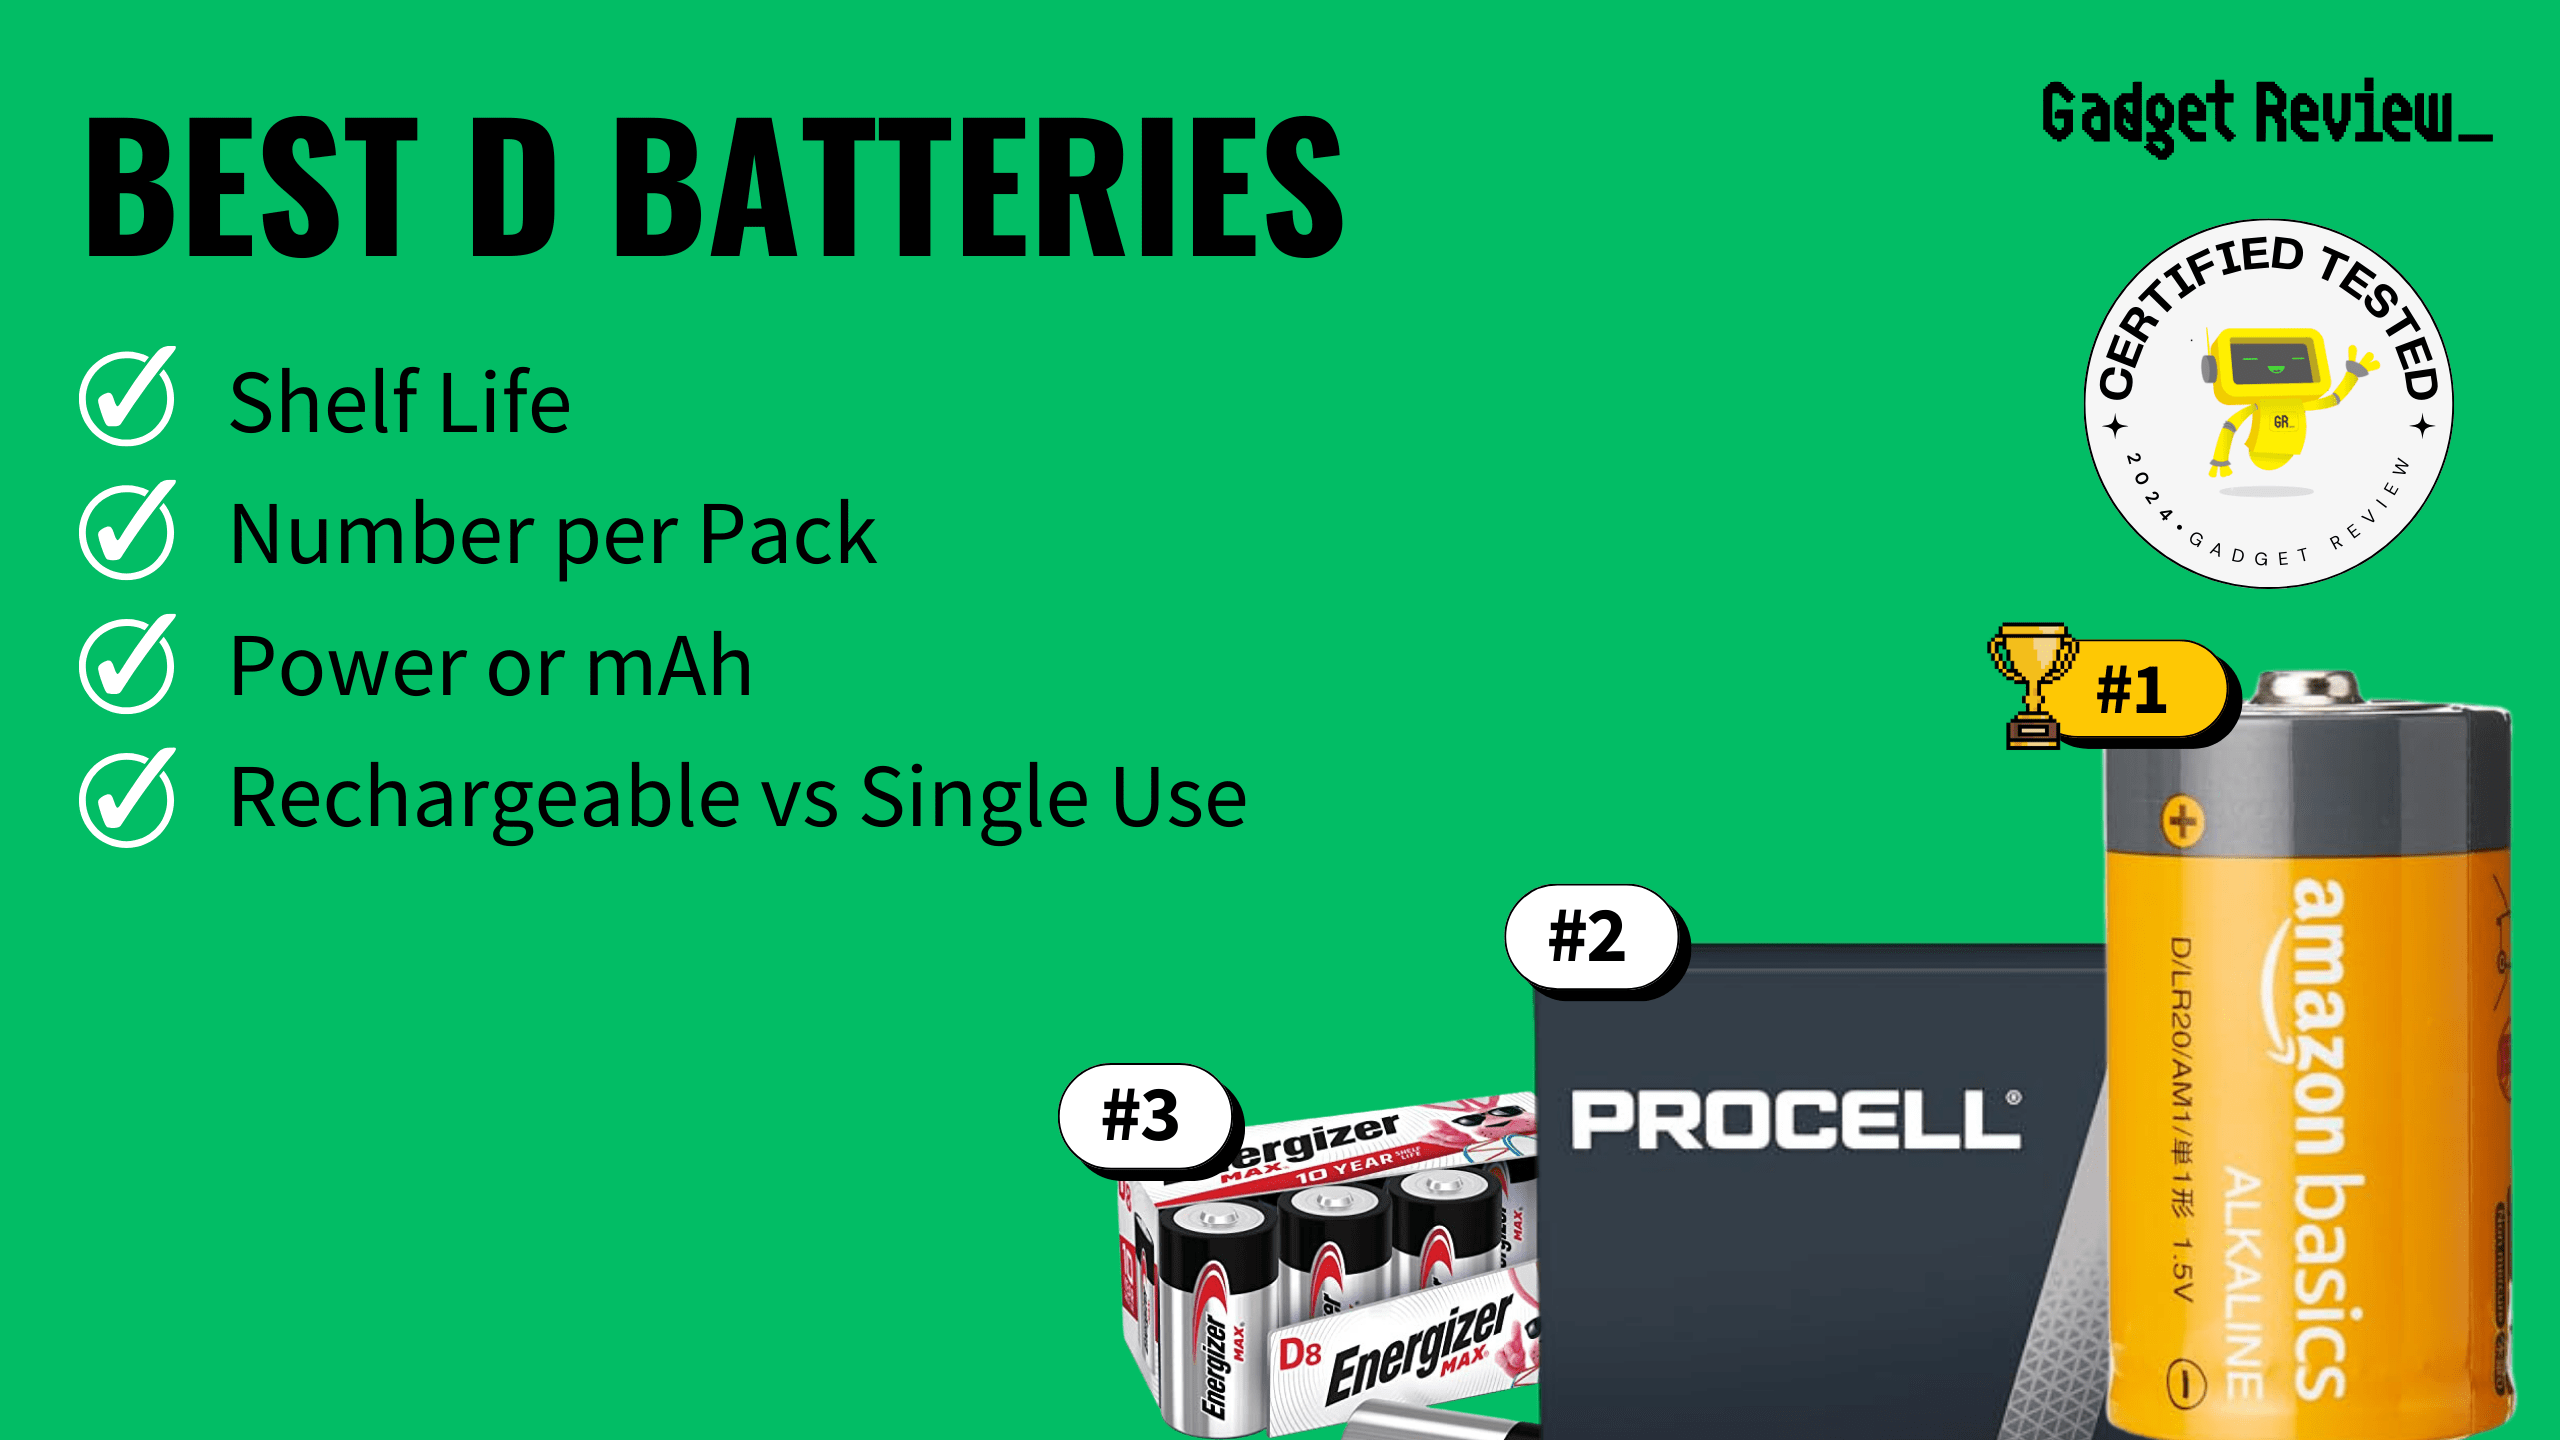 best d batteries guide that shows the top best electronic model